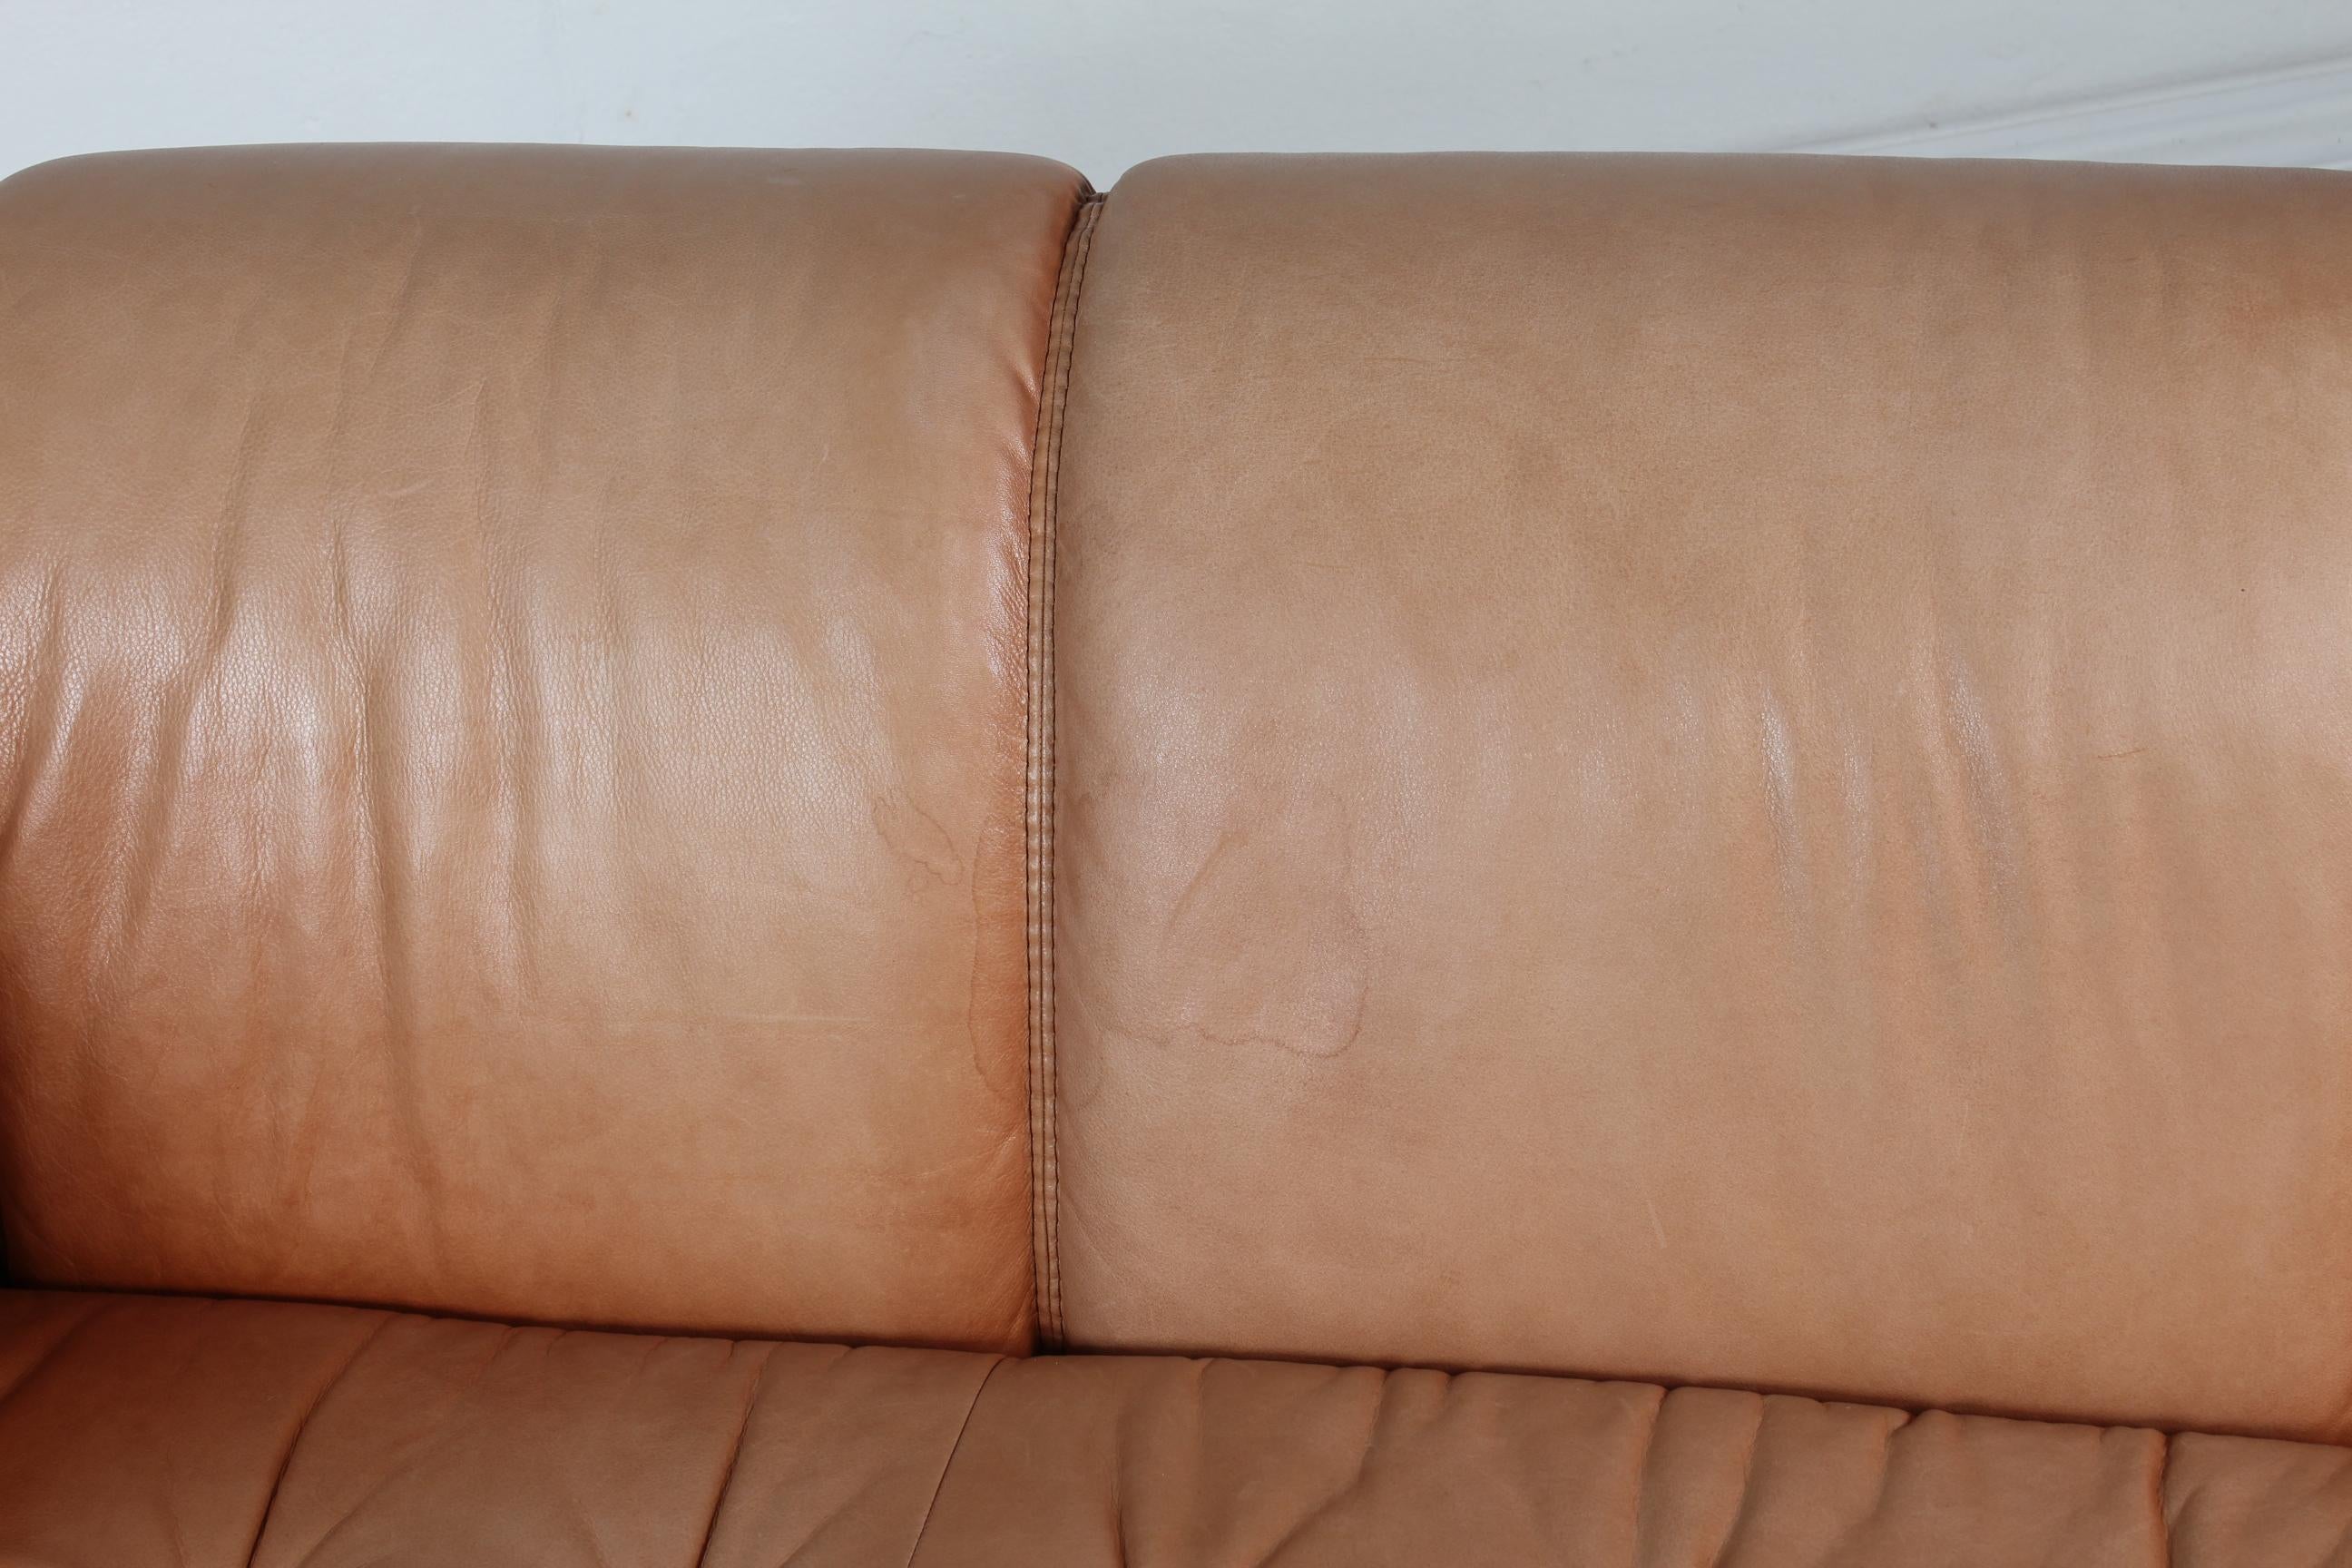 Vintage Chesterfield Sofa and Couch Cognac Leather and Mahogany Frame, 1970s For Sale 6